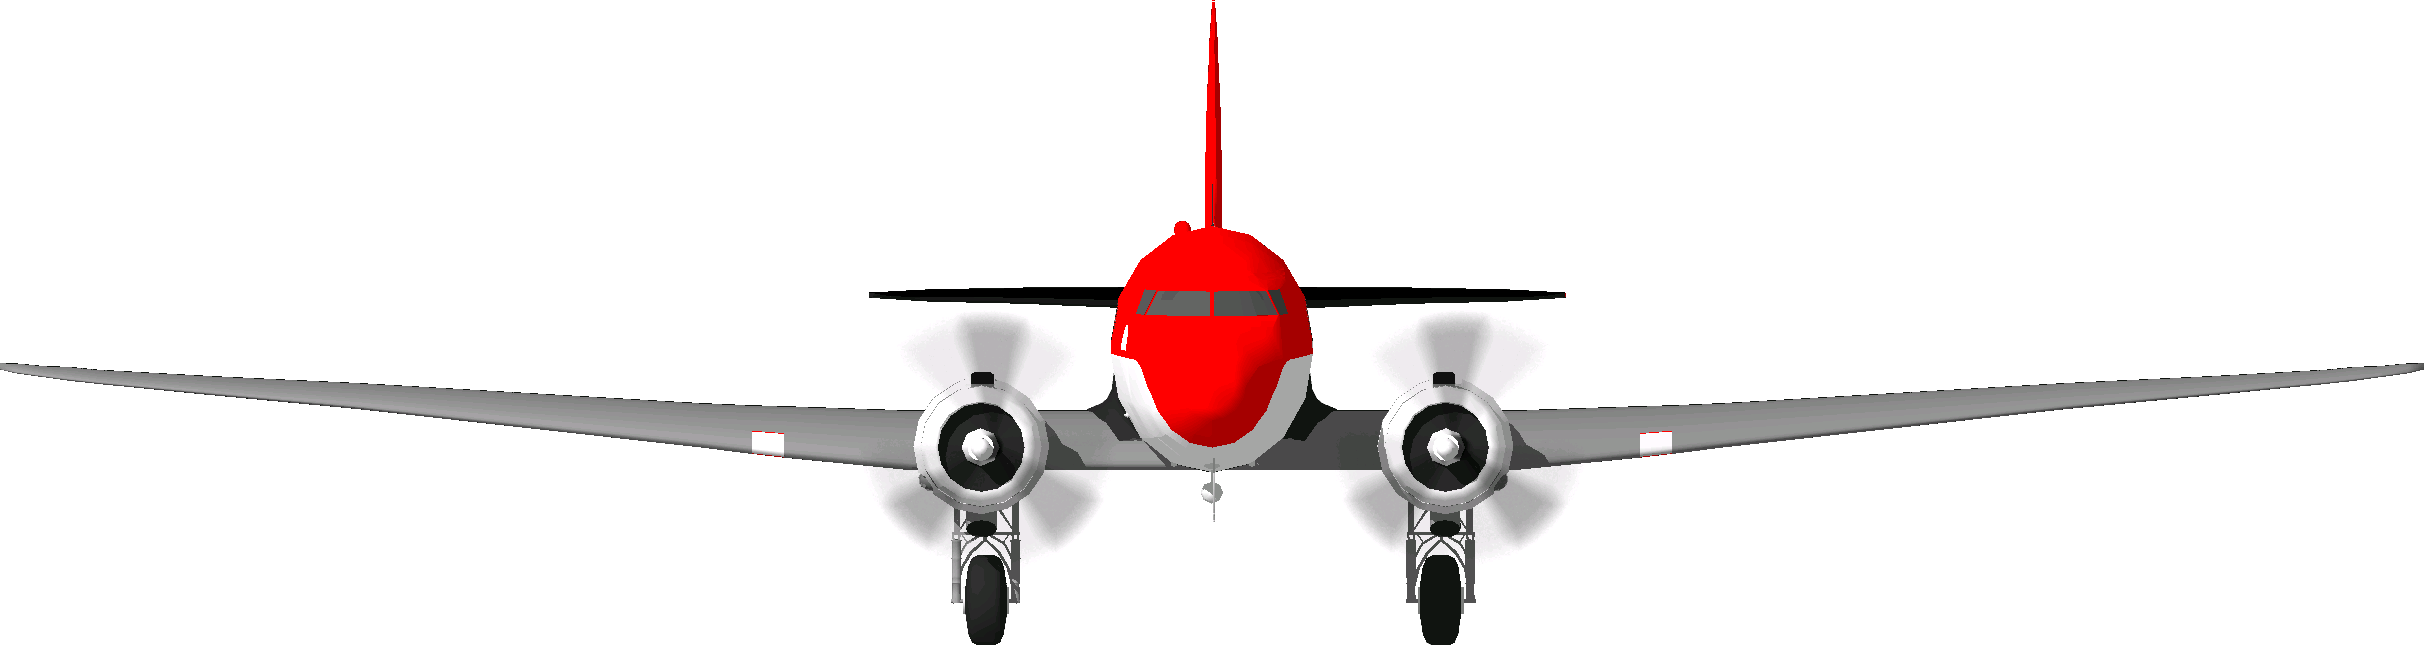 airplane clipart front view - photo #30